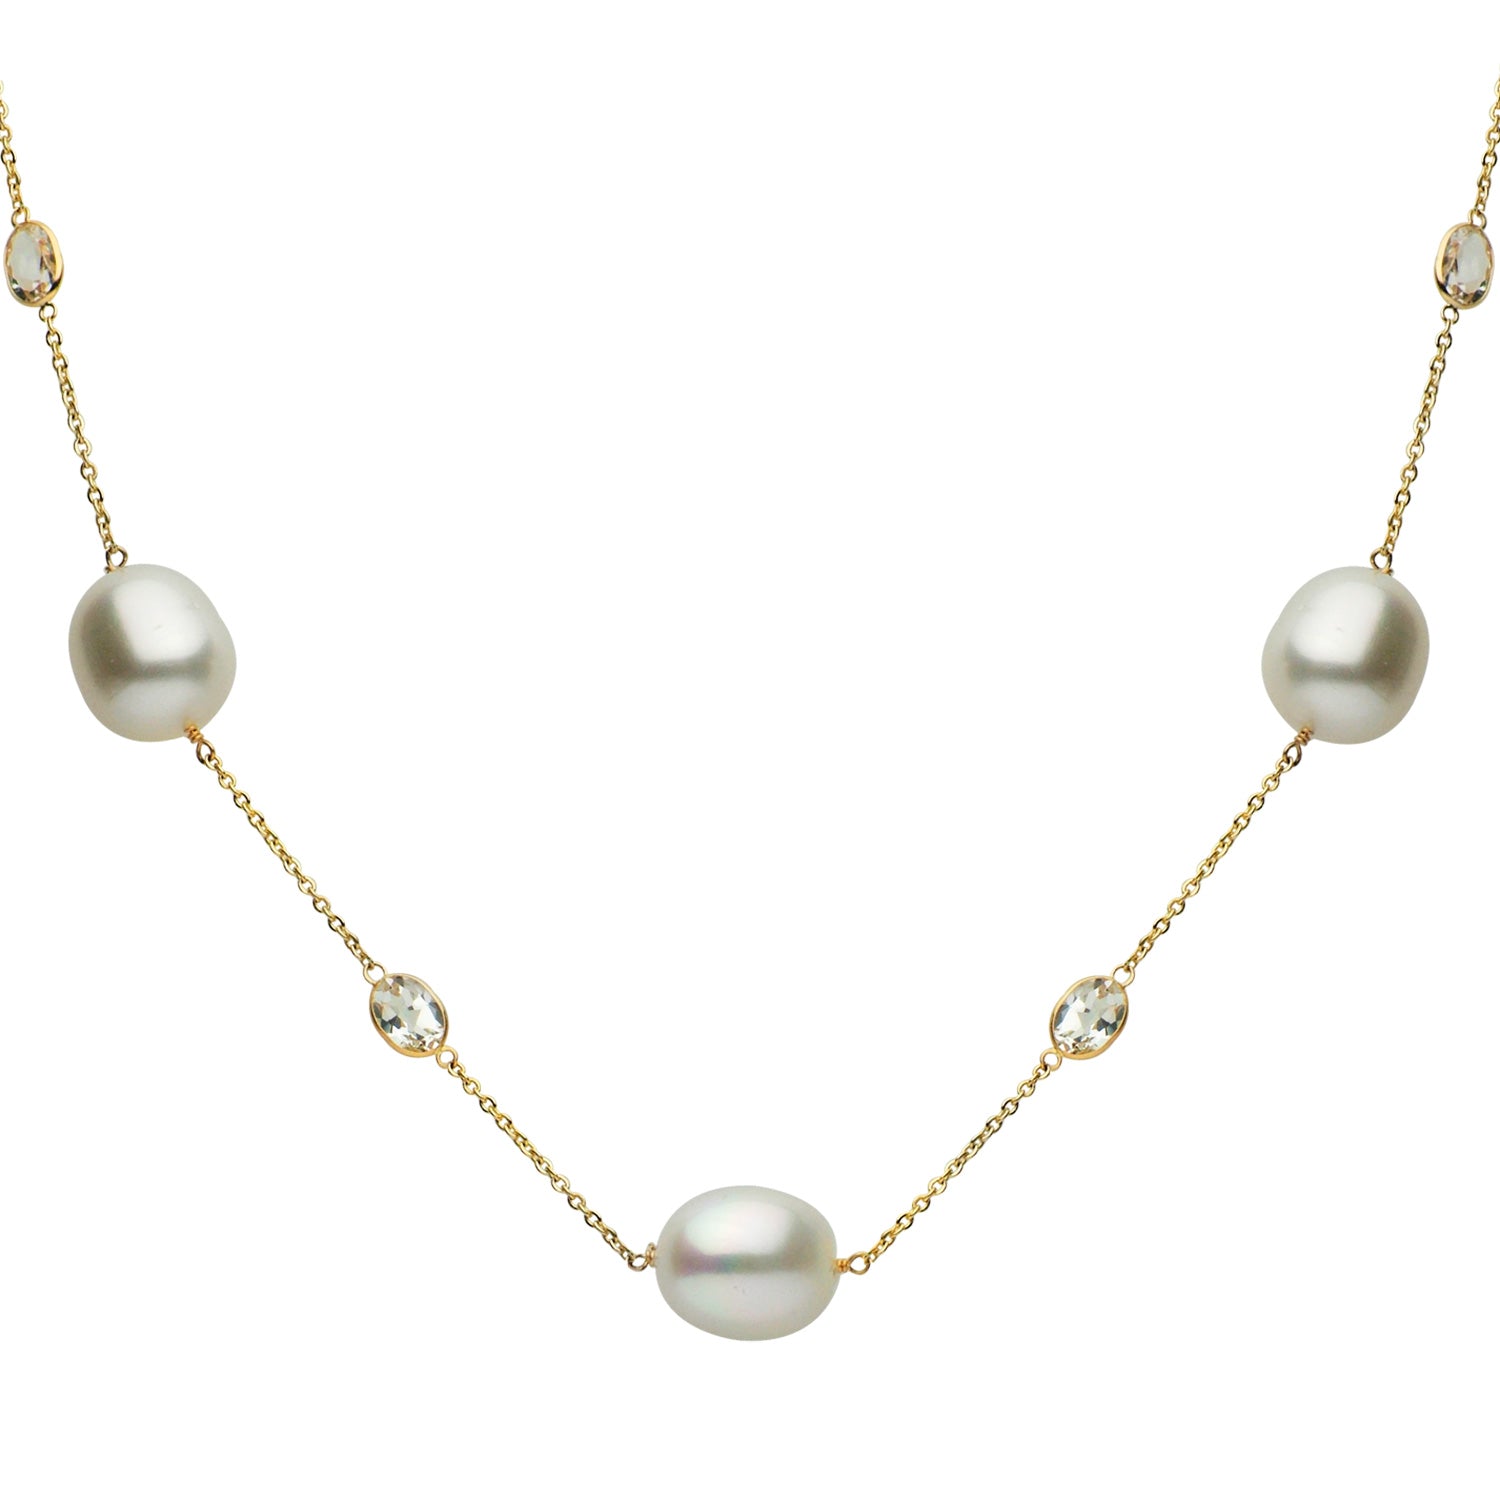 14KY White South Sea Pearl Tincup, 11-12mm